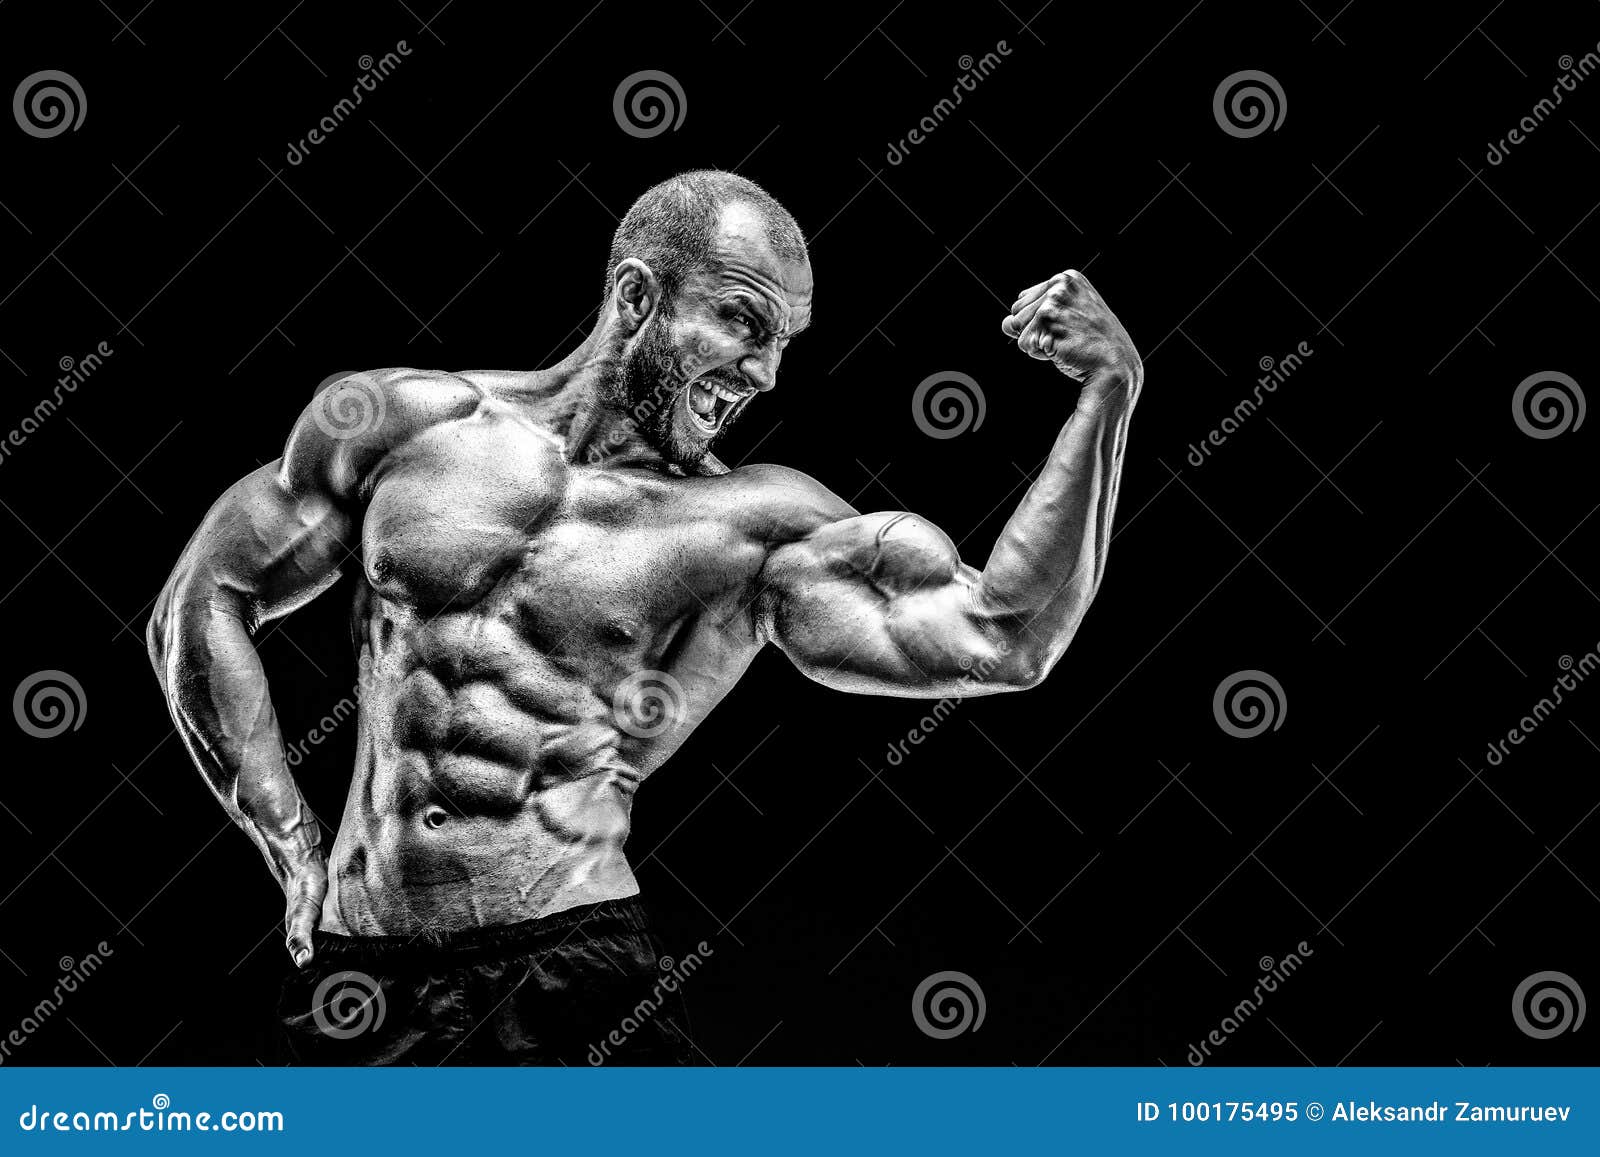 Strong Bald Bodybuilder with Six Pack. Stock Image - Image of diet ...